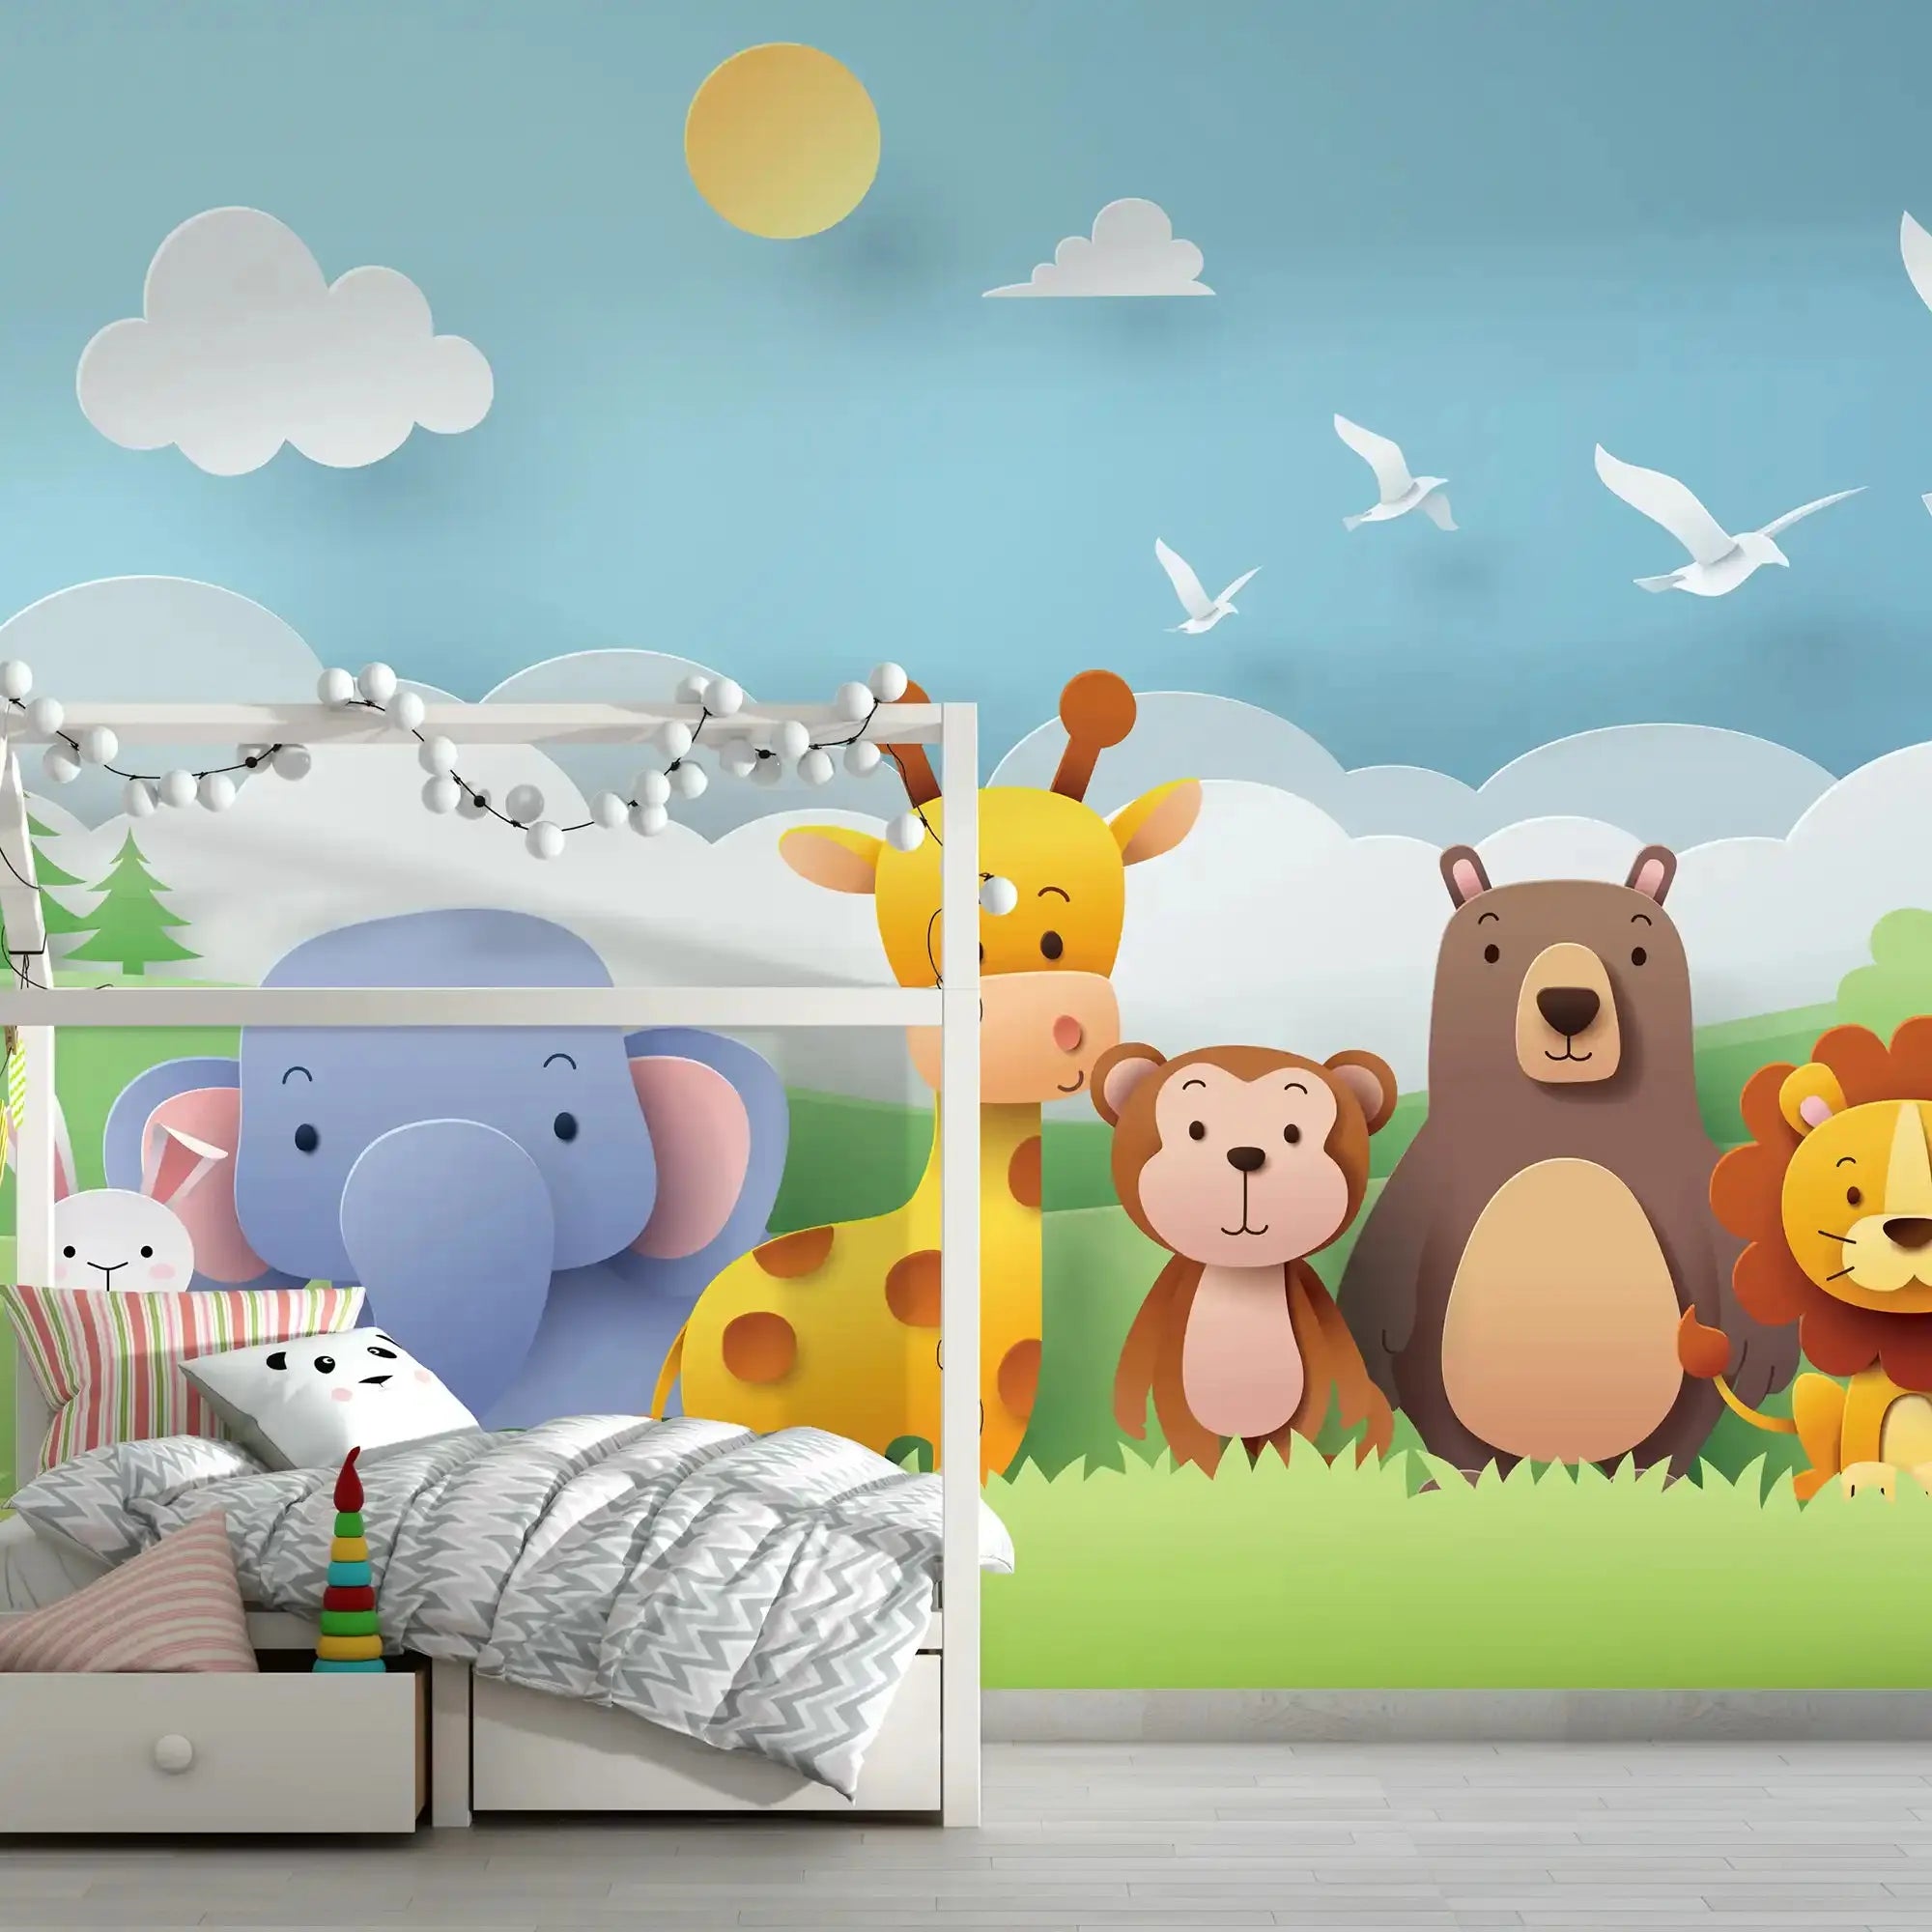 6006 / Peel and Stick Nursery Wallpaper with Colorful Cartoon Animals - Perfect for Child Room, Playroom Decor! - Artevella